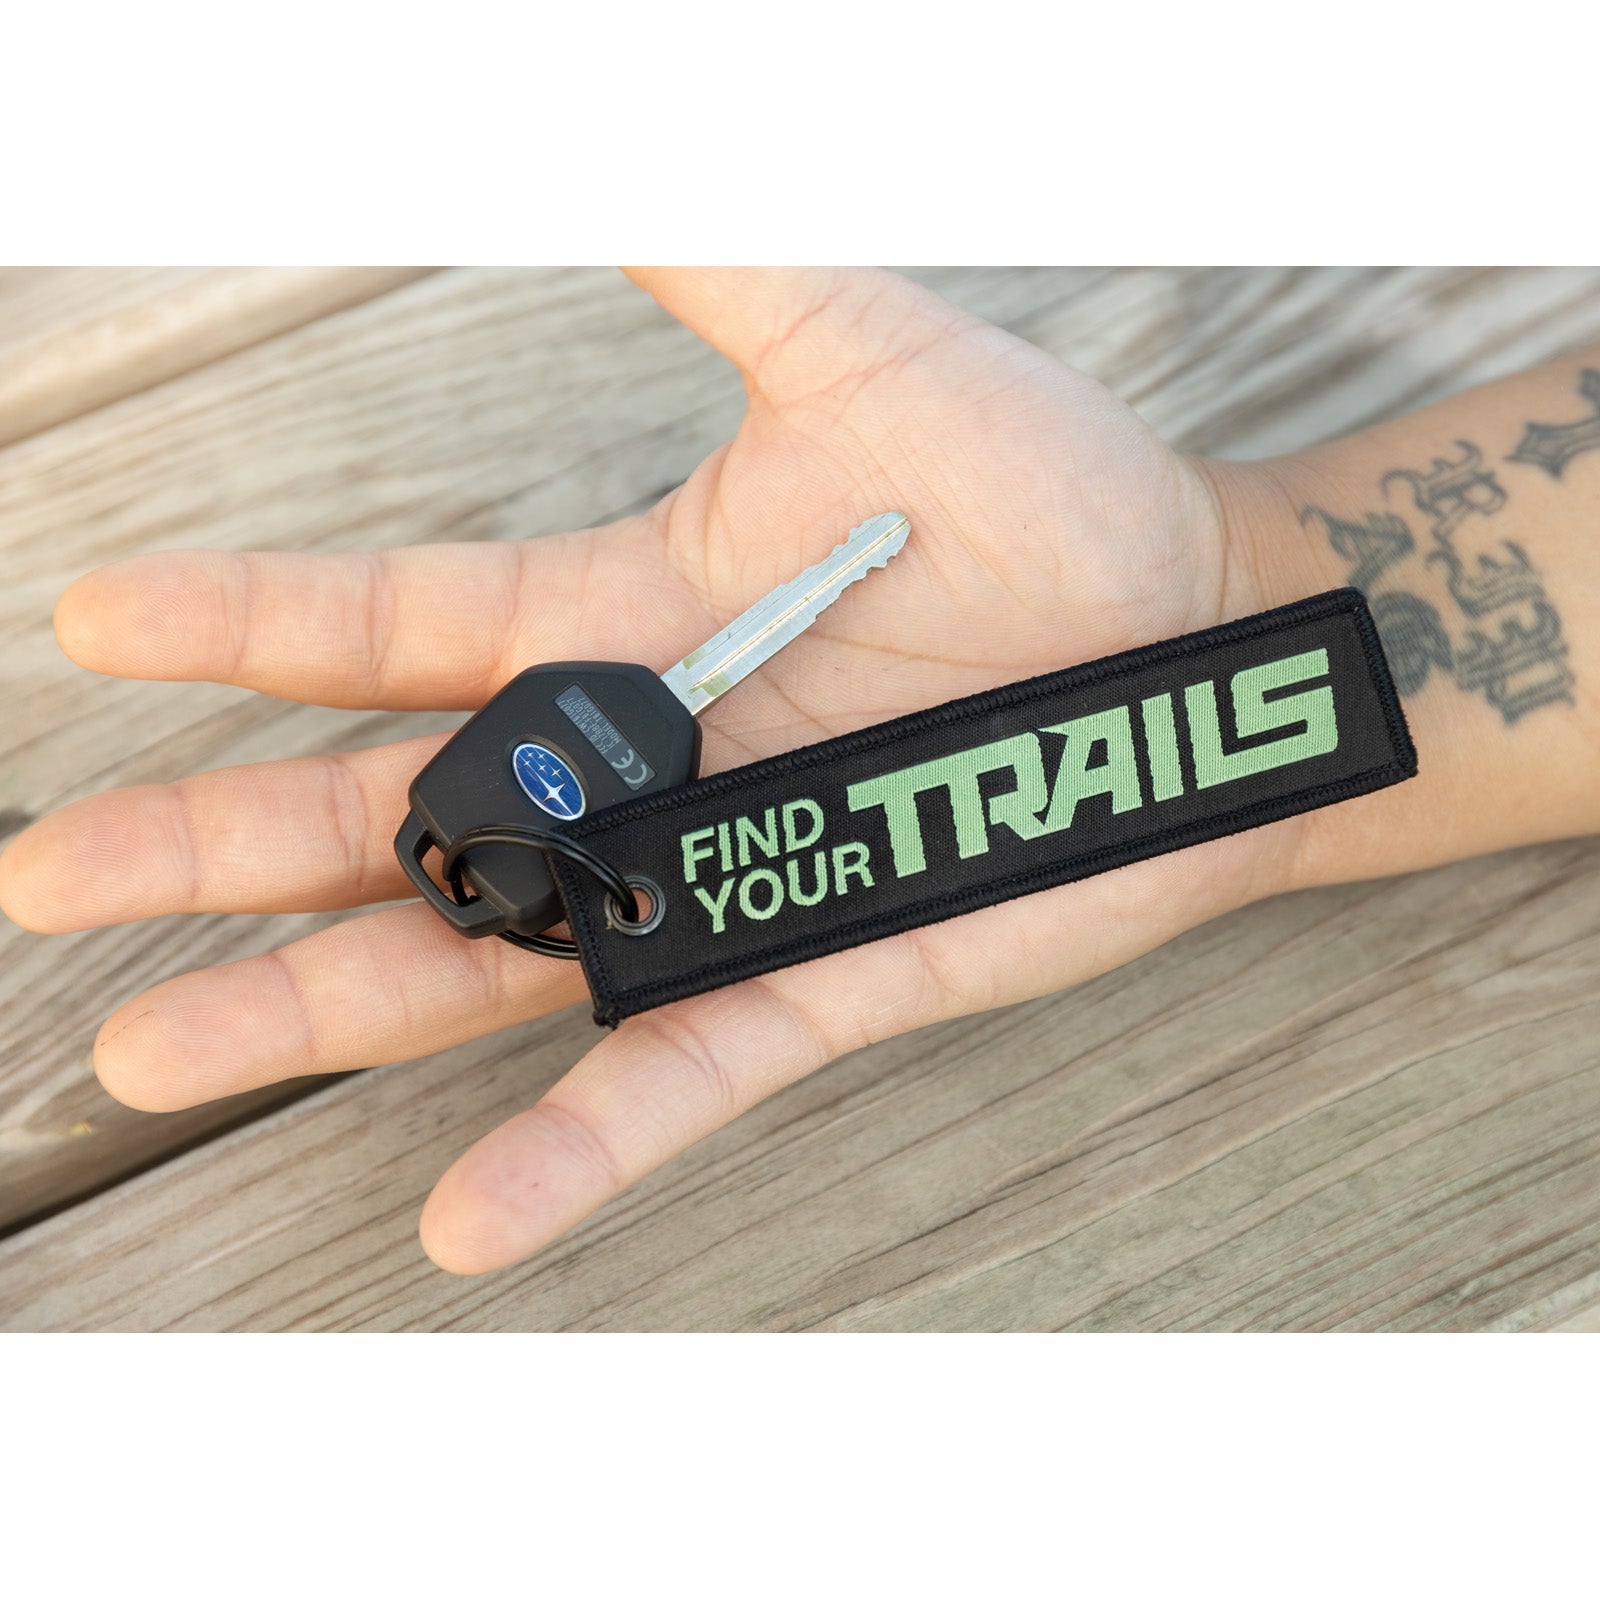 TRAILS by GrimmSpeed Jet Tag - Find Your TRAILS - 0